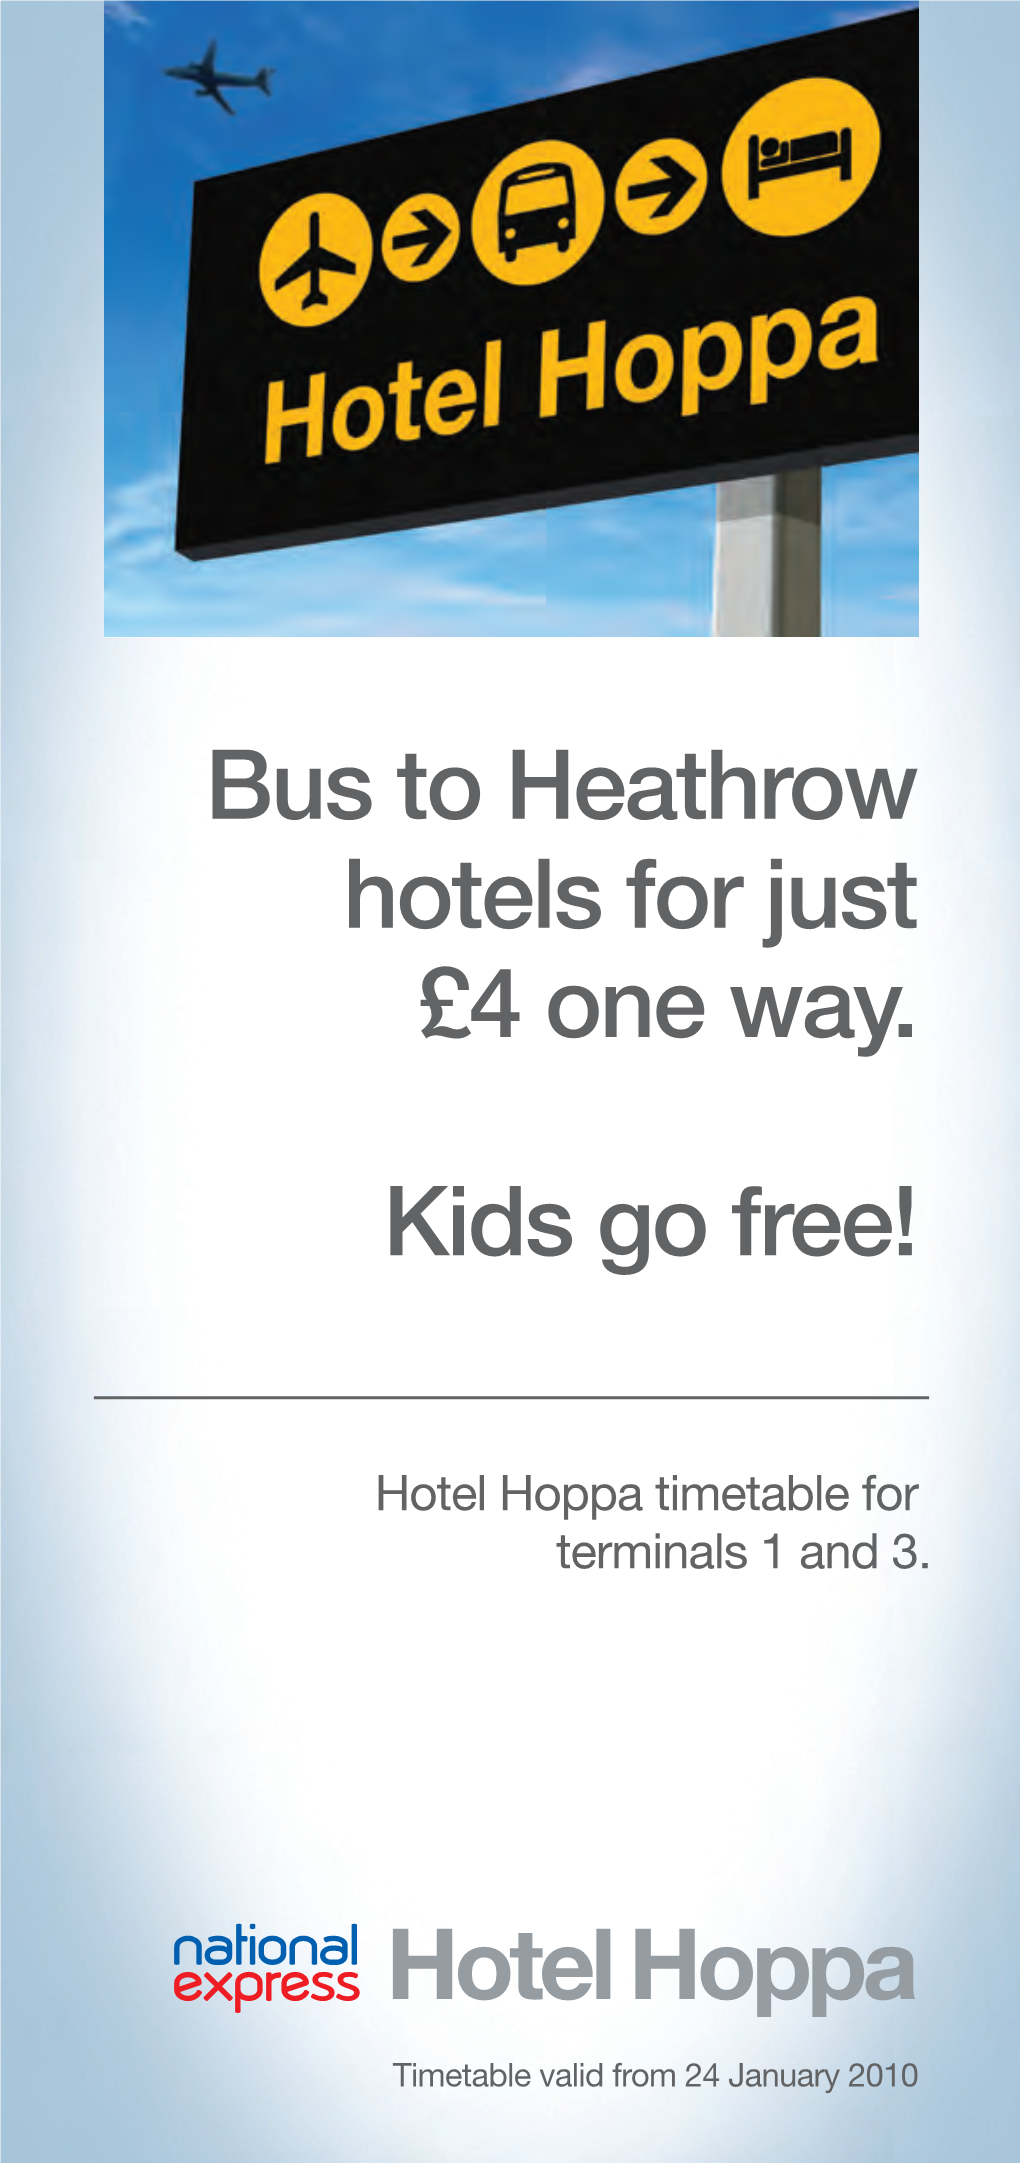 Hotel Hoppa Timetable for Terminals 1 and 3